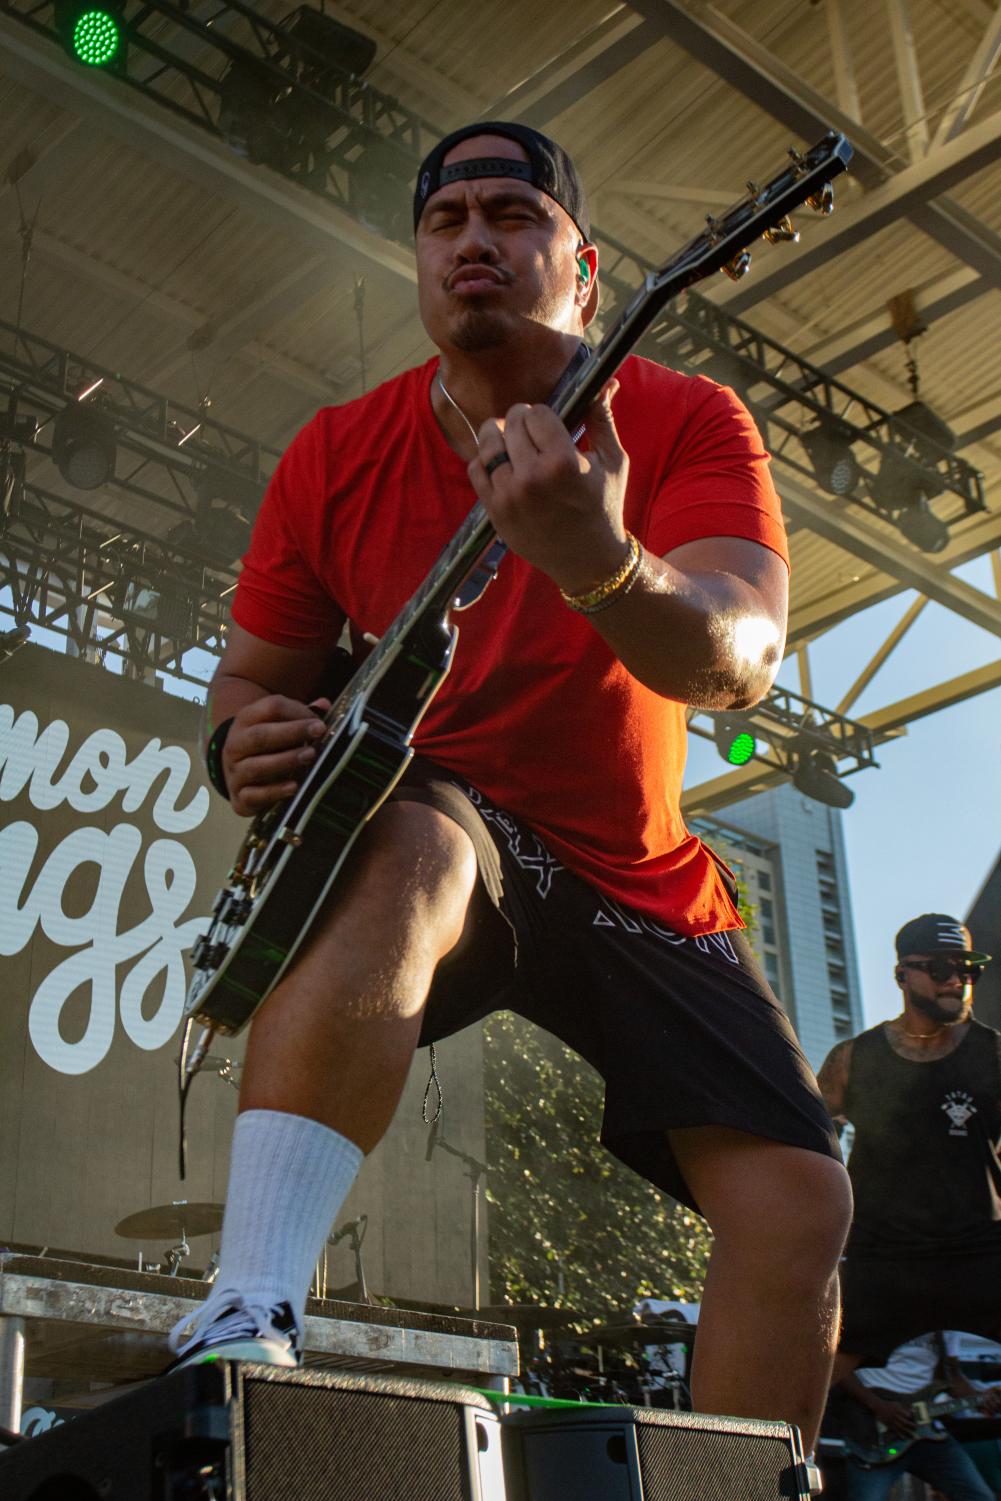 Slightly Stoopid concert brings rock and reggae to San Diego The